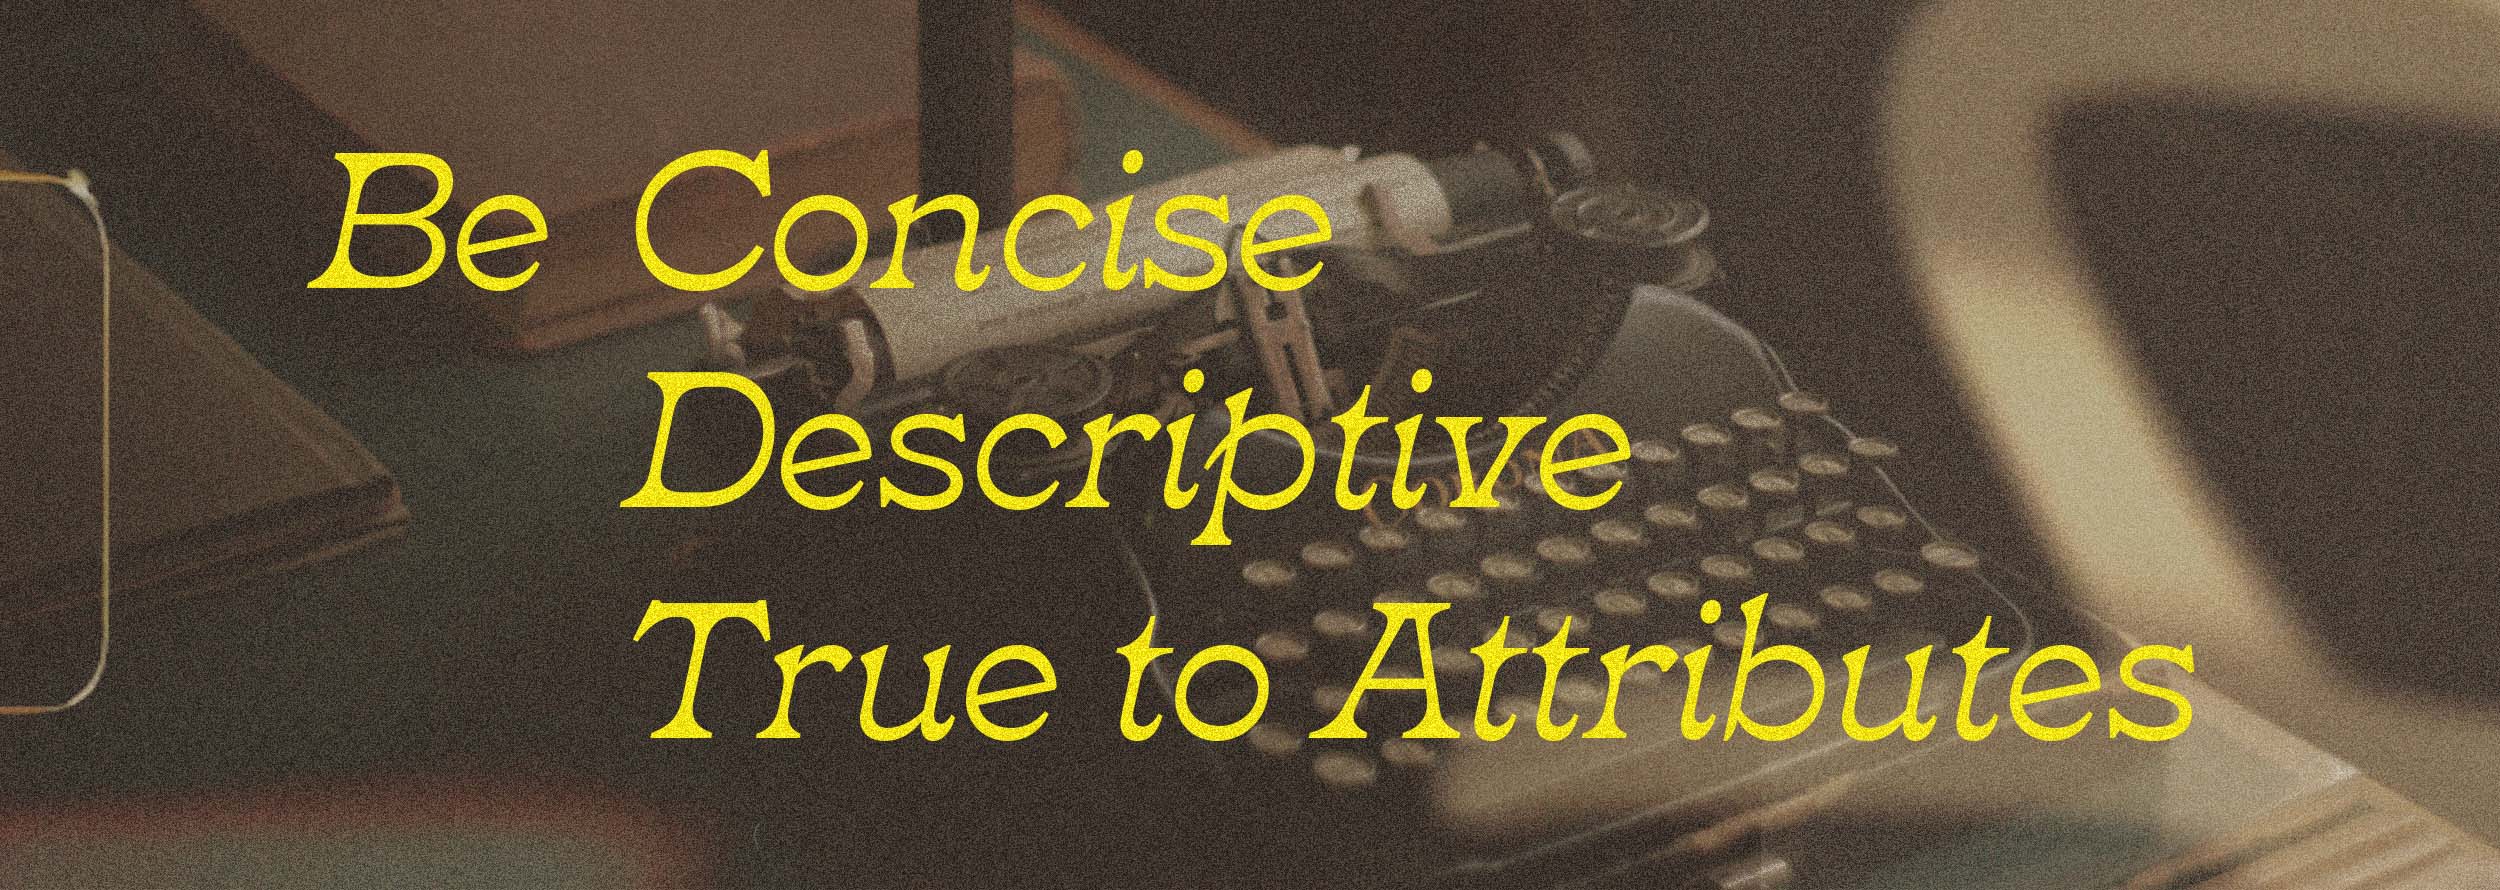 A photo of a vintage typewriter is textured with film grain with writing "Be Concise, Descriptive, and True to Attributes"